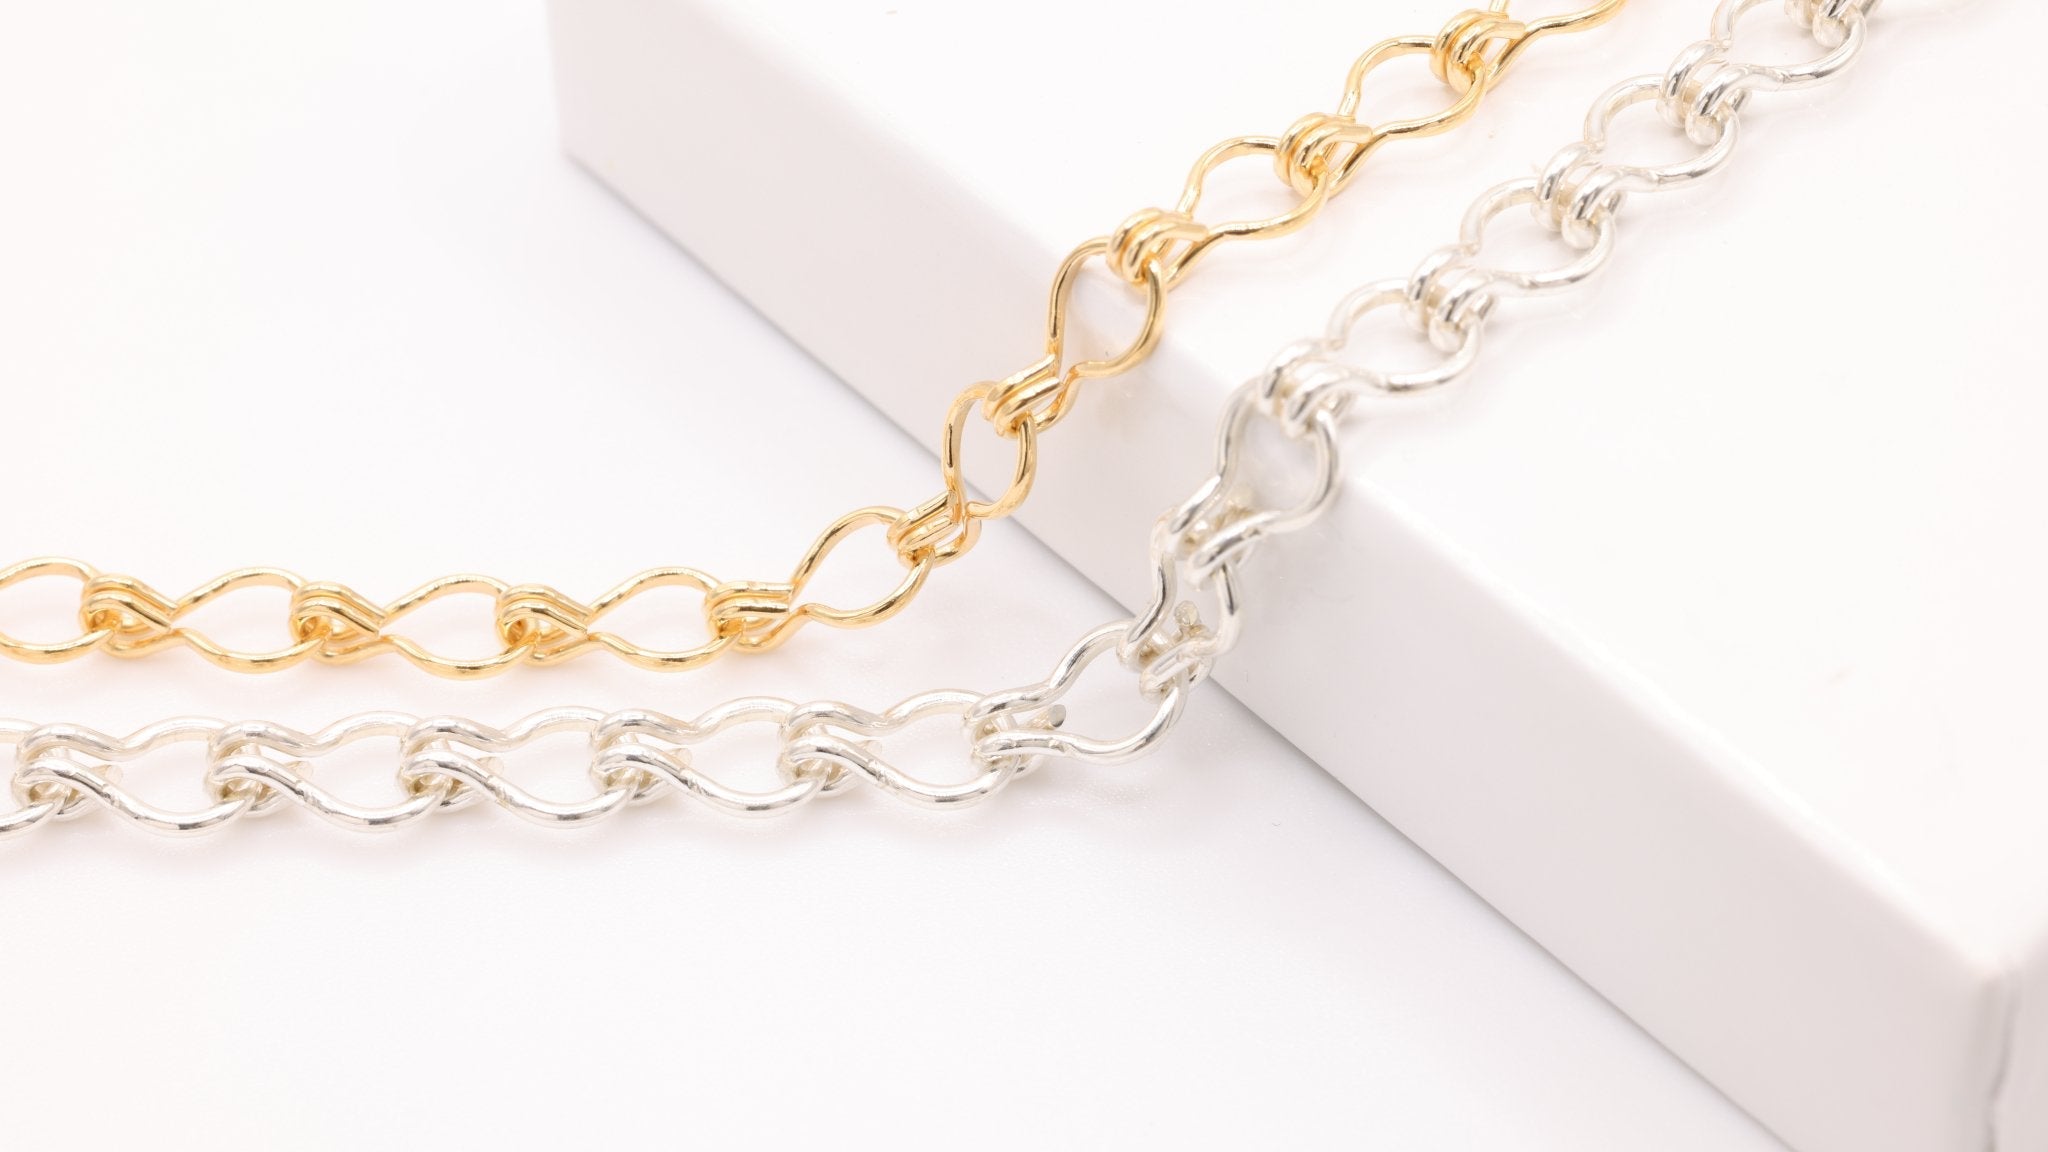 5mm Ladder Chain, Sterling Silver, Pay Per Foot, Jewelry Making Chain - HarperCrown